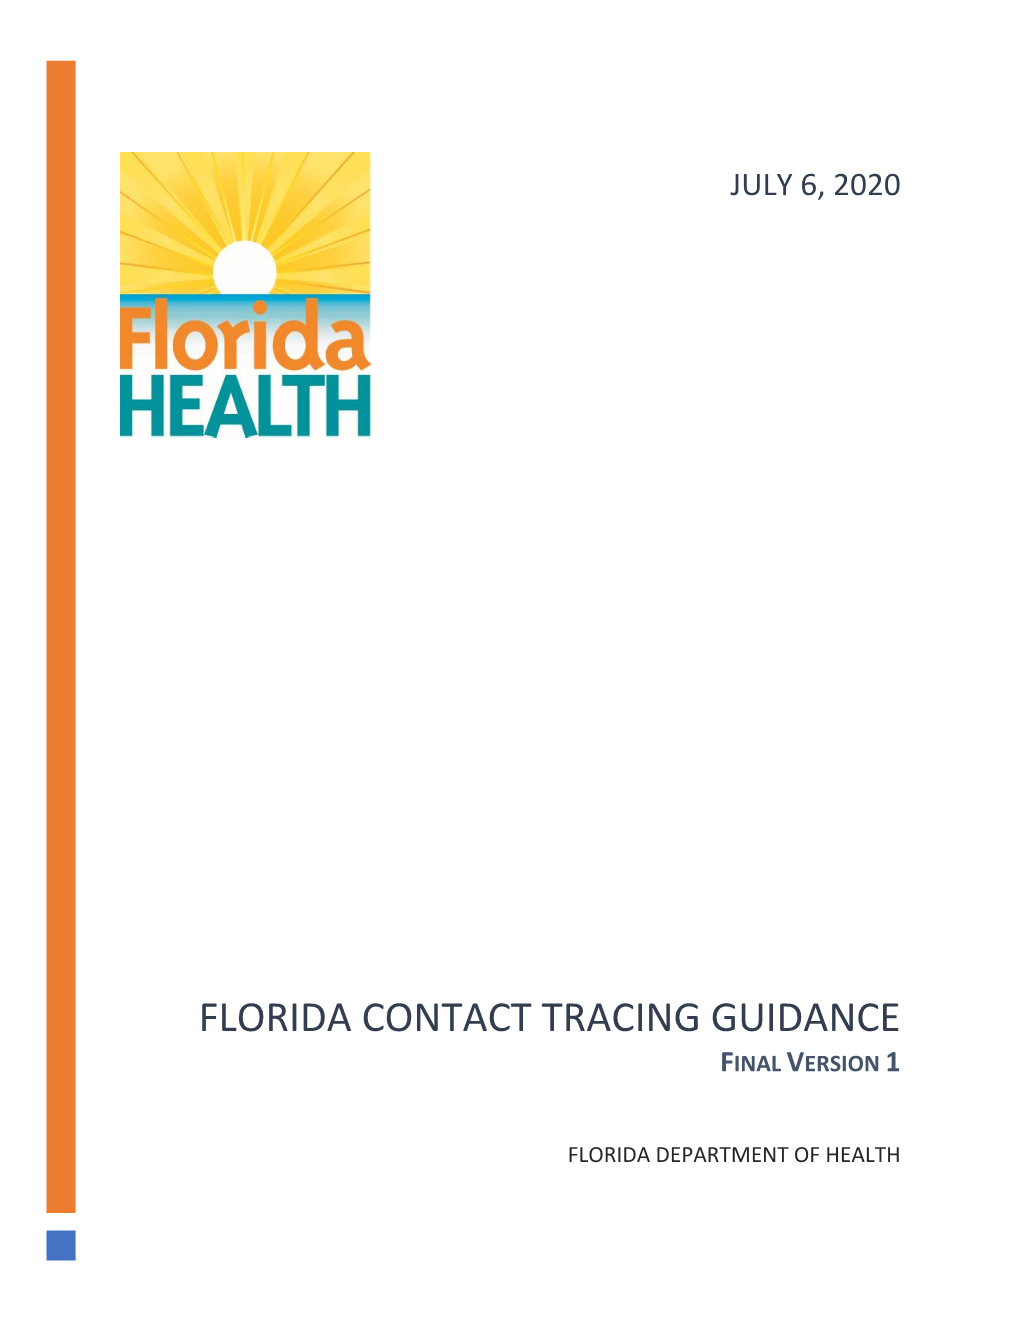 Contact Tracing Guidance Final Version 1